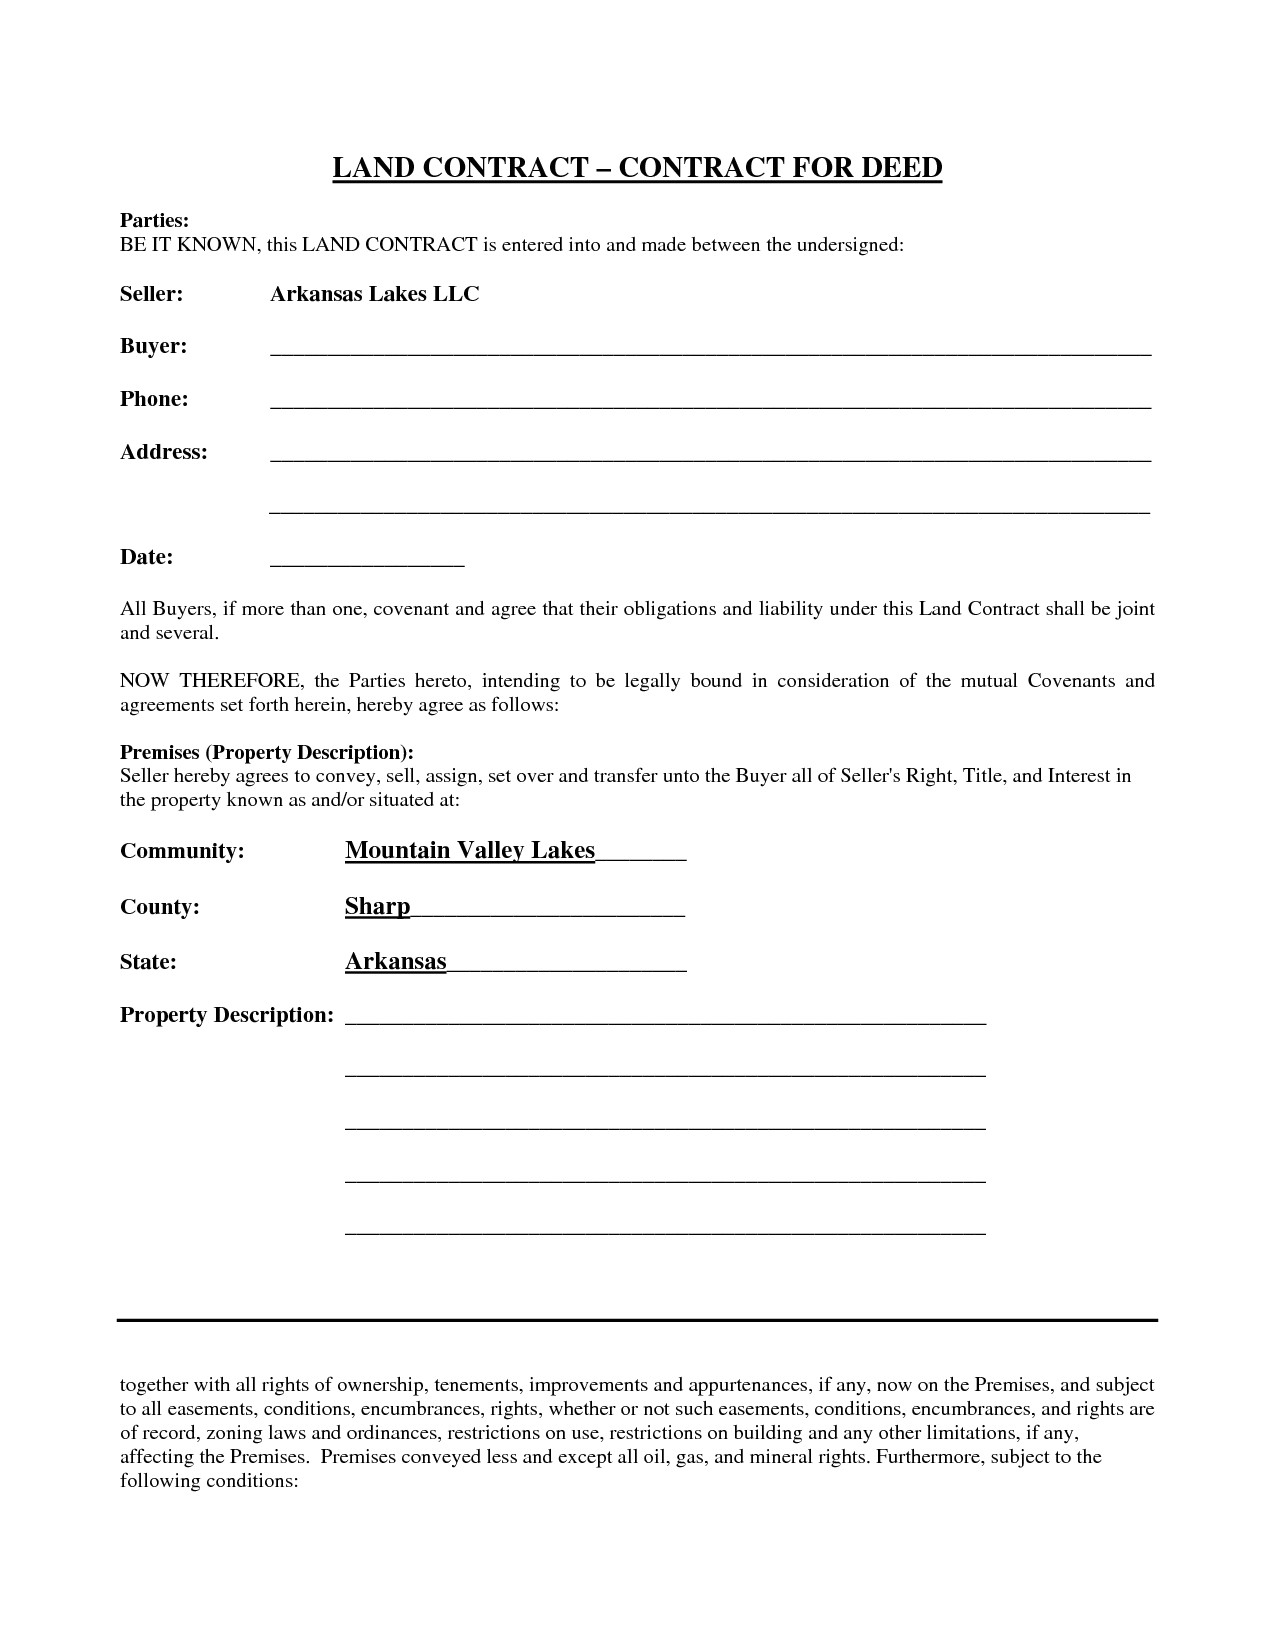 simple yet best blank land contract form for deed with parties and buyer information and property description